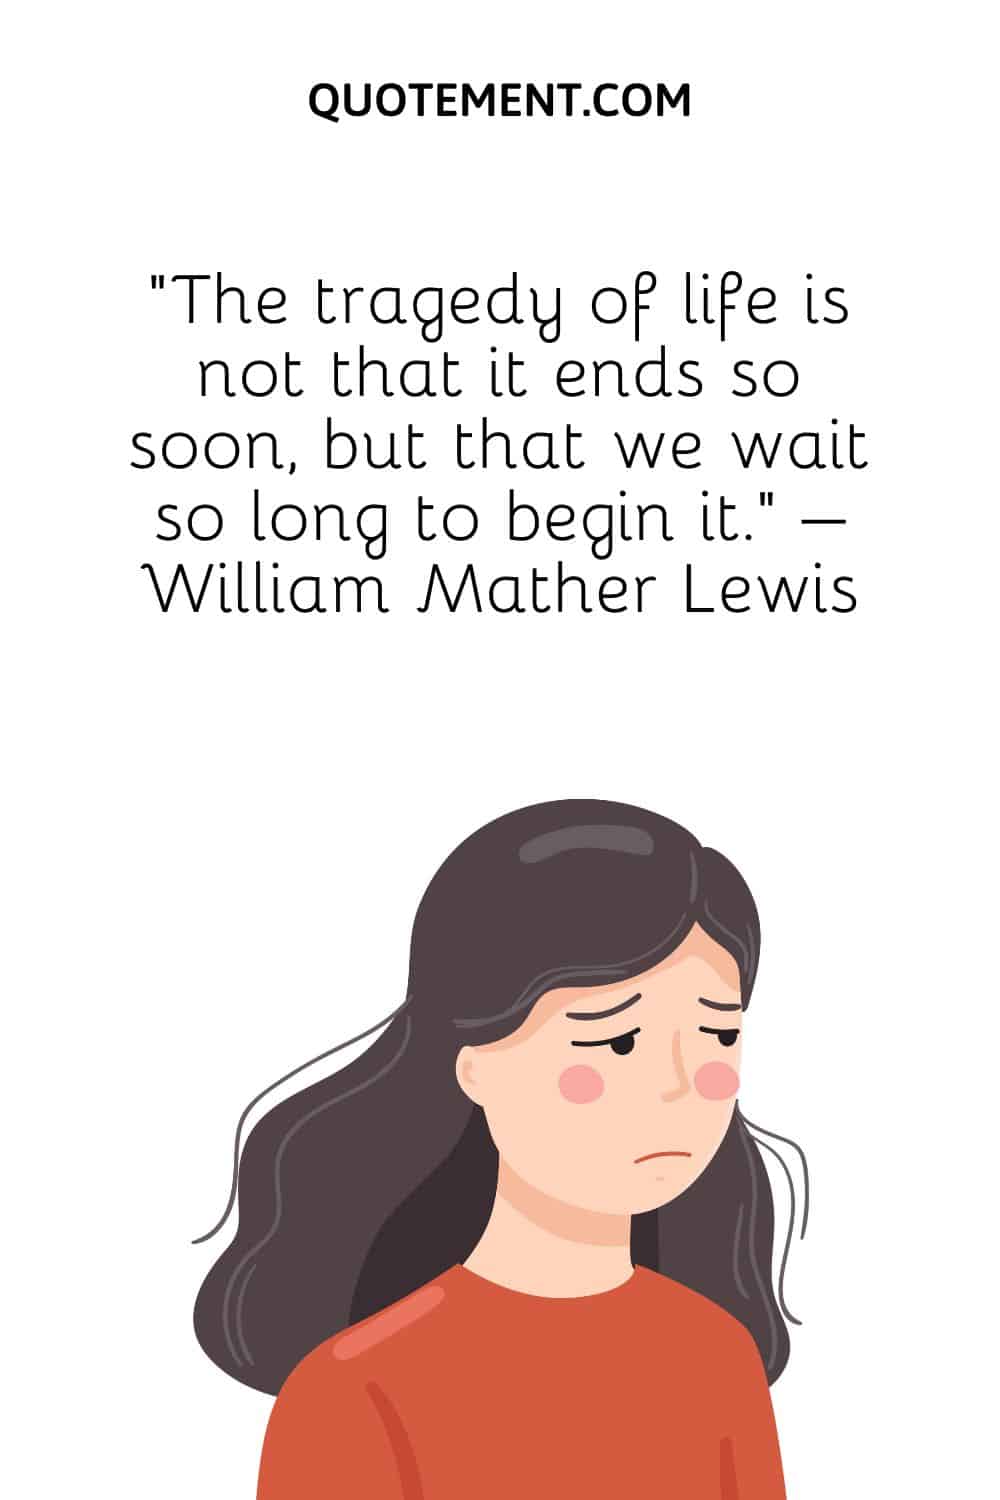 “The tragedy of life is not that it ends so soon, but that we wait so long to begin it.” – William Mather Lewis